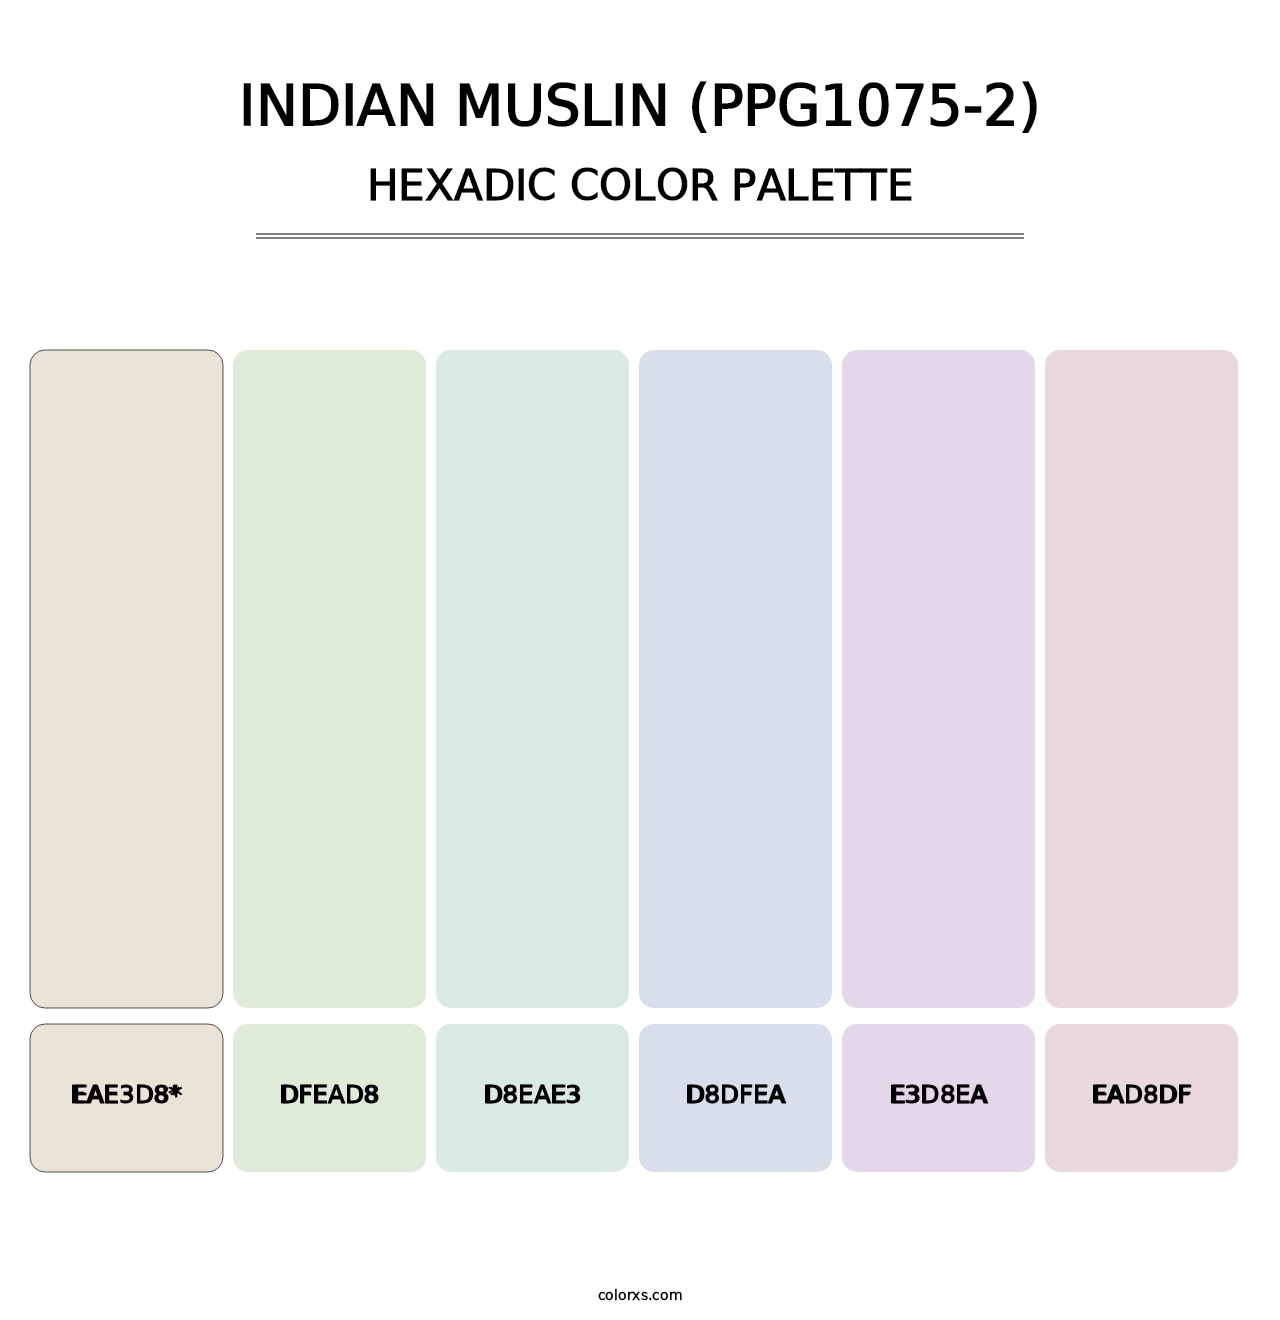 Indian Muslin (PPG1075-2) - Hexadic Color Palette